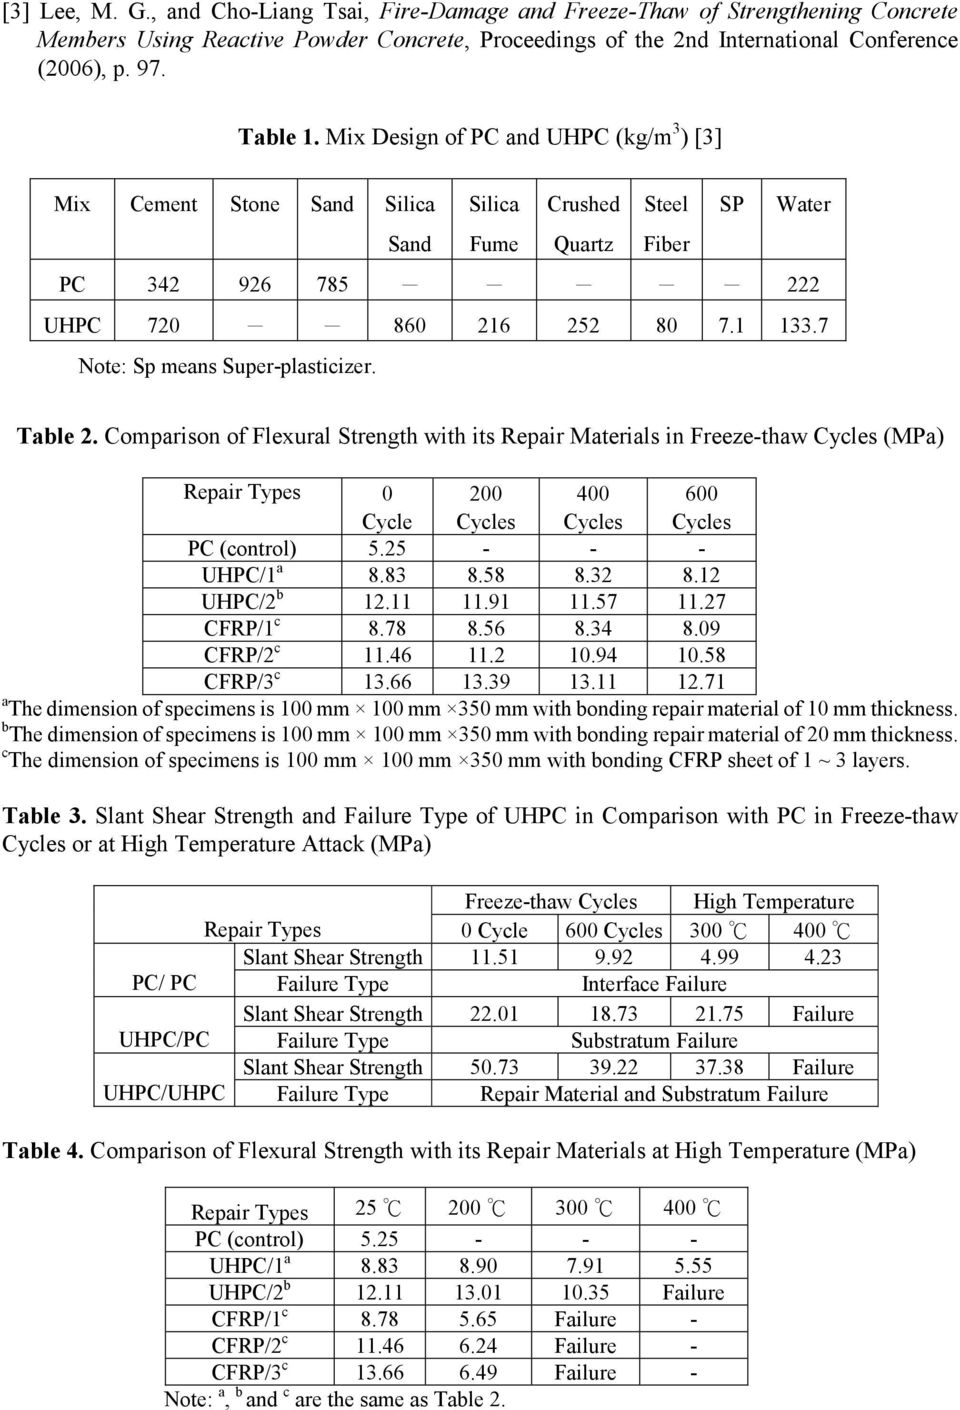 7 Note: Sp means Super-plasticizer. Table 2. Comparison of Flexural Strength with its Repair Materials in Freeze-thaw (MPa) Repair Types 0 Cycle 200 400 600 PC (control) 5.25 - - - UHPC/1 a 8.83 8.